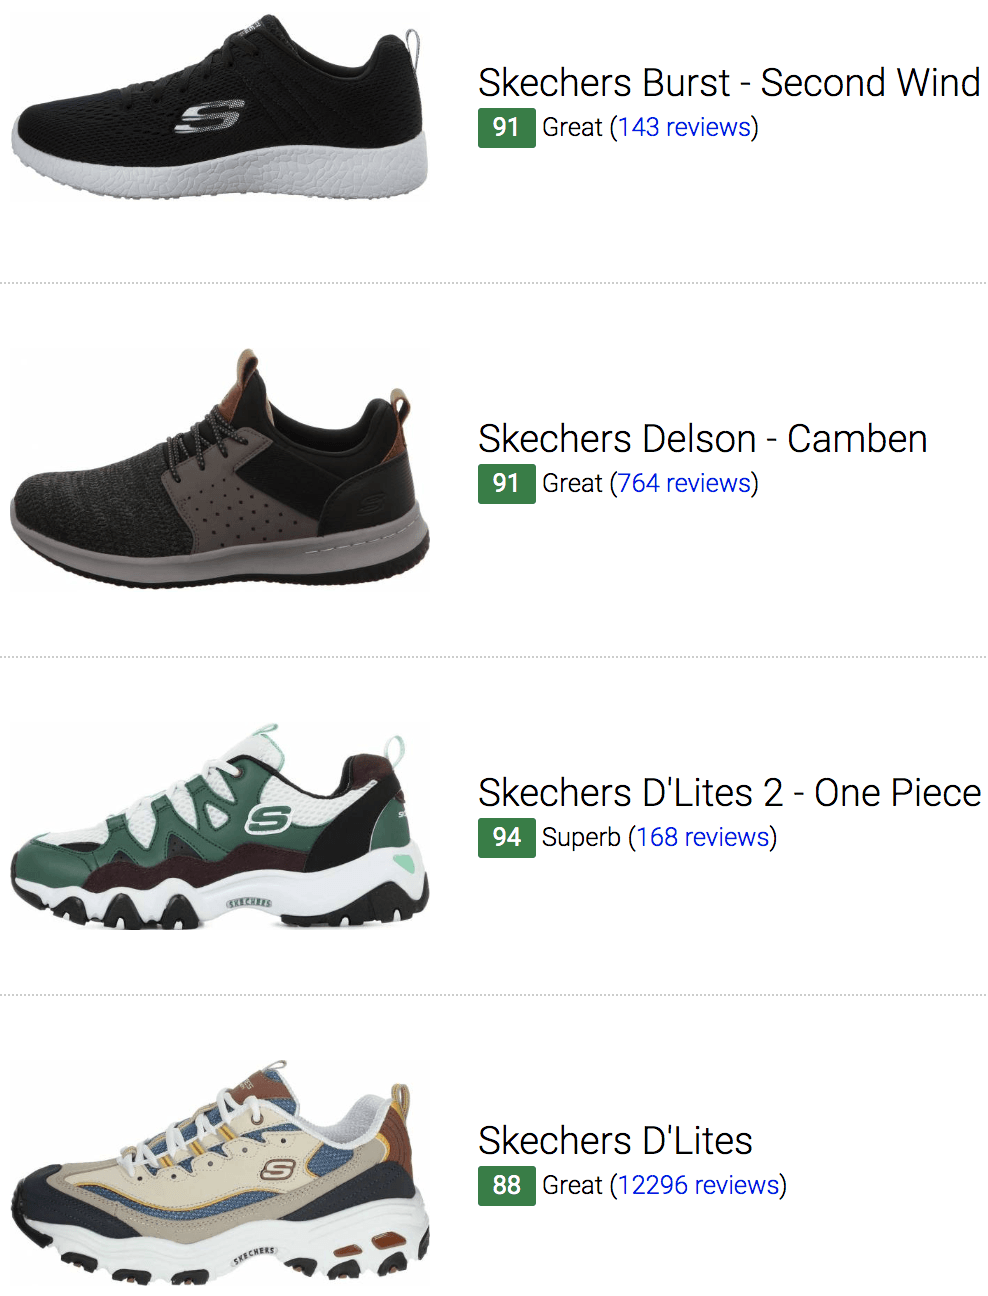 show me some skechers shoes